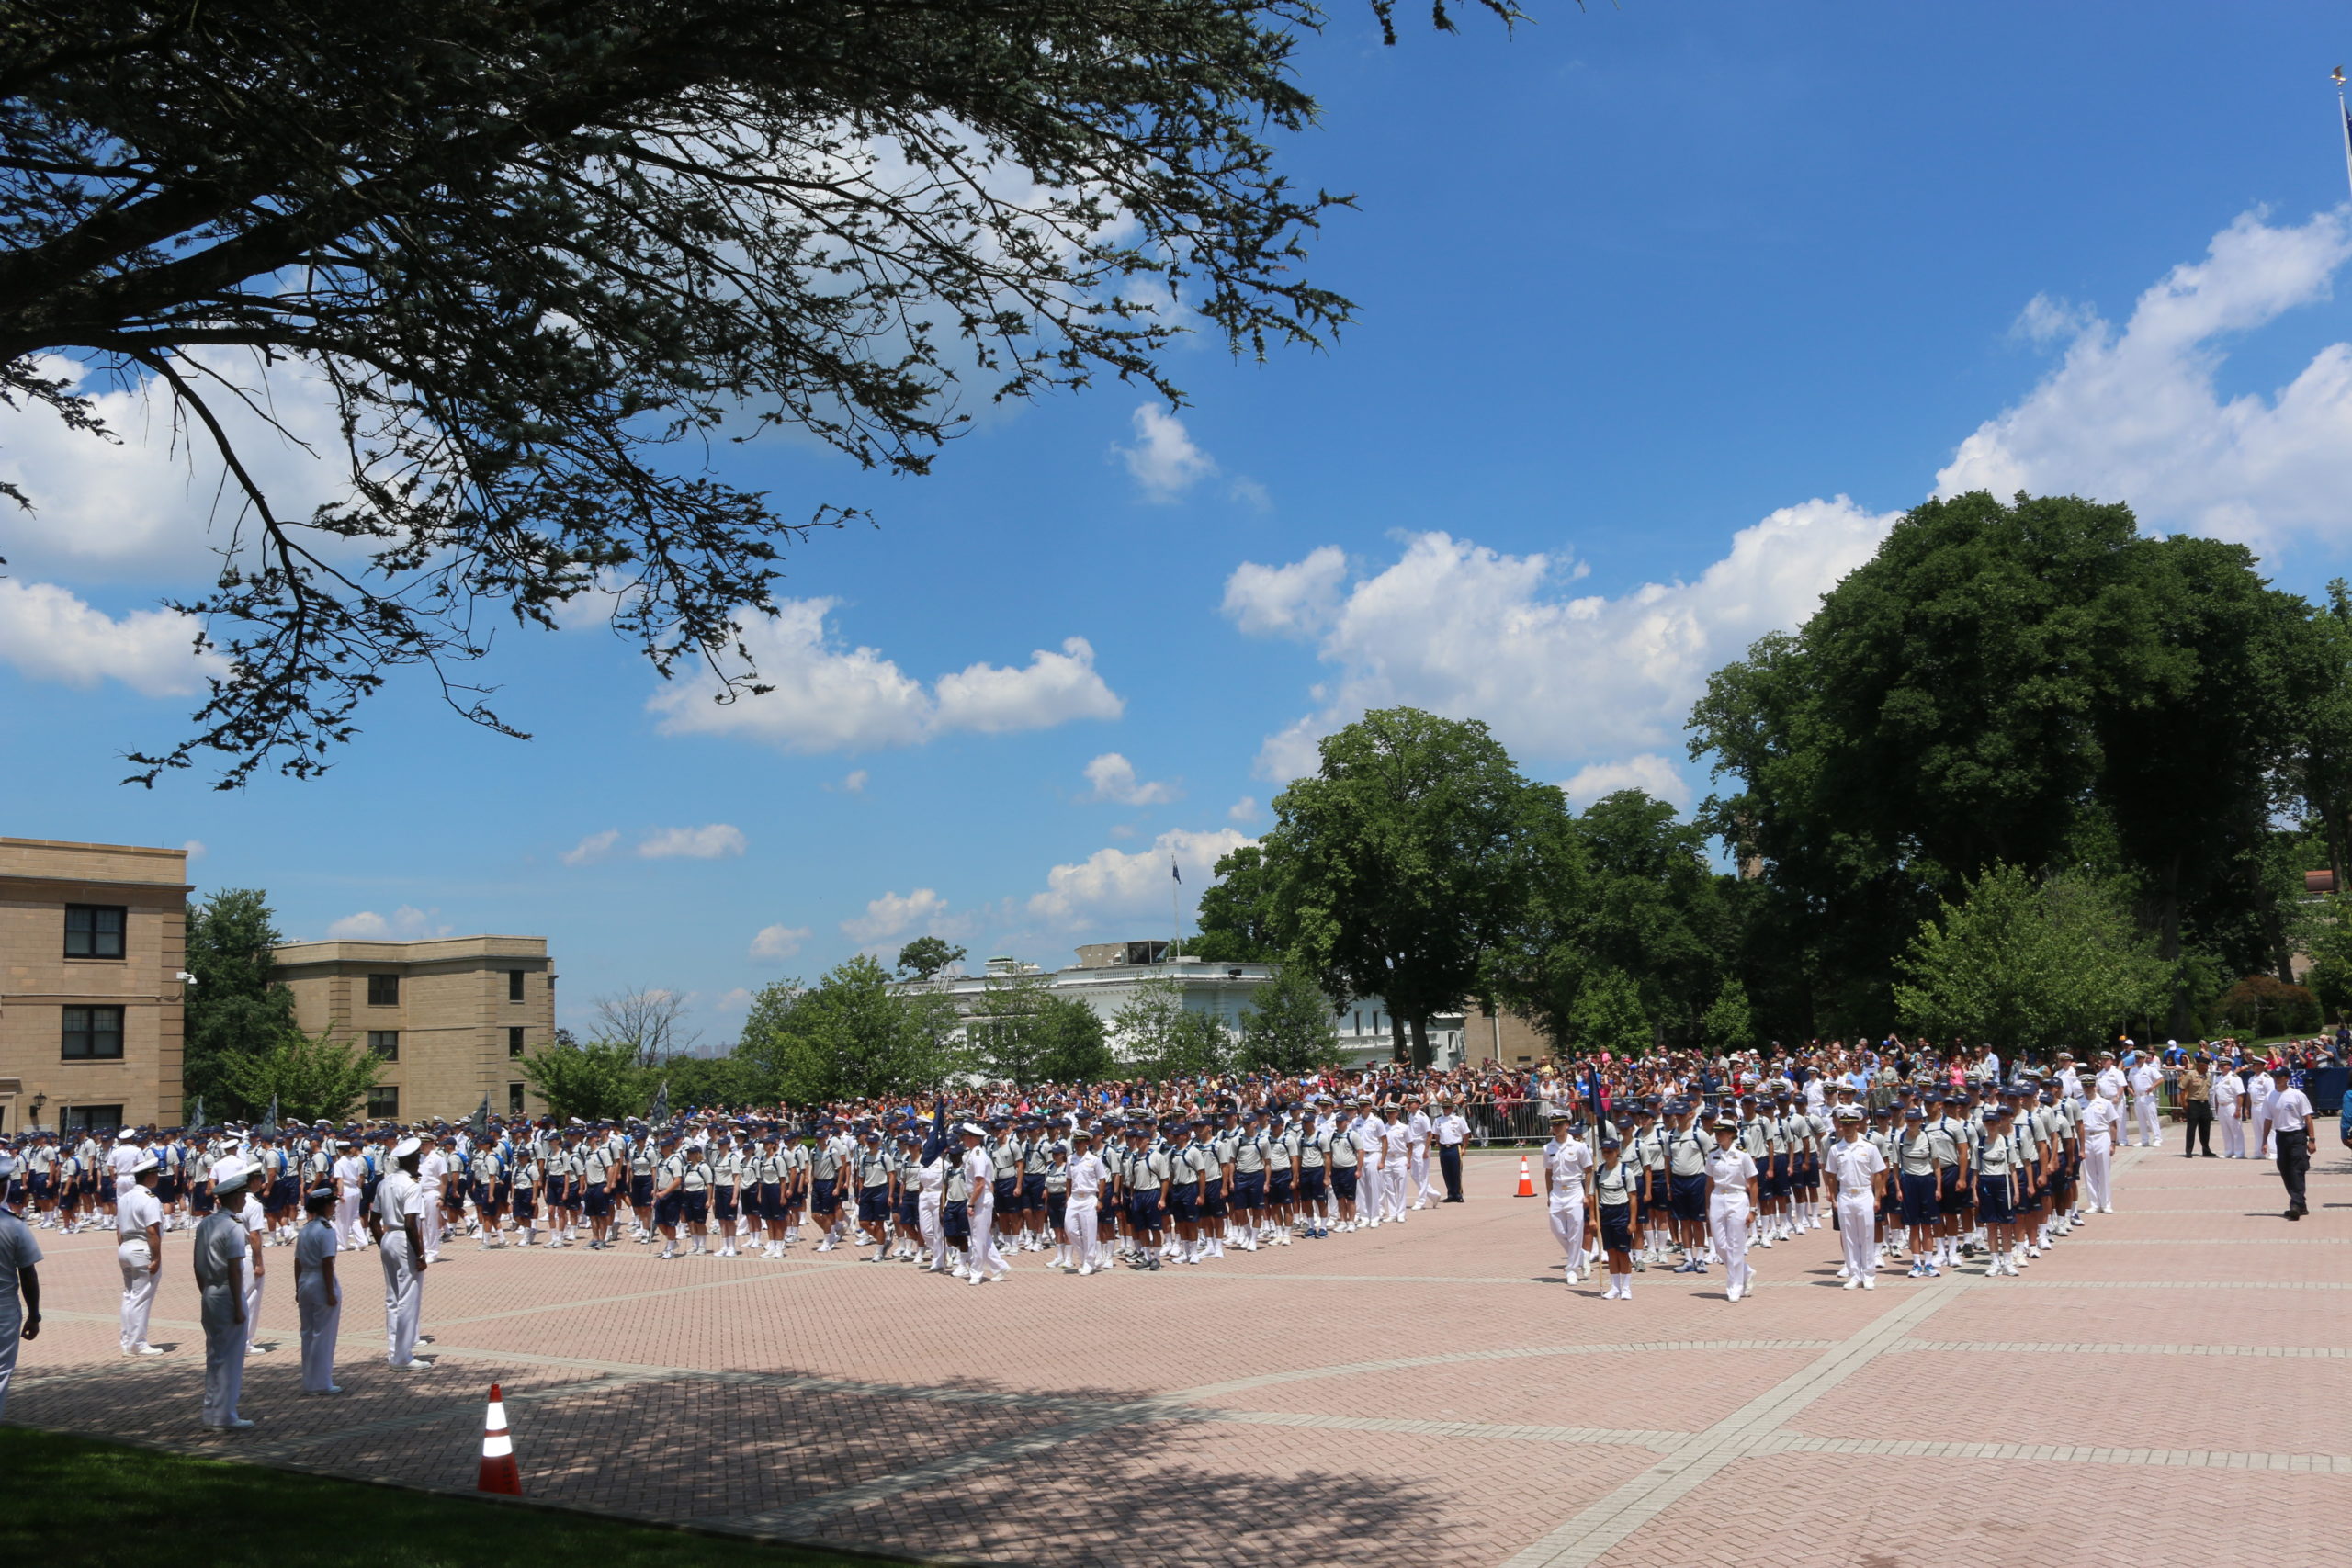 Plebe candidates of the Class of 2022 stood in formation at the U.S. Merchant Marine Academy for the first time and reported to the Indoctrination Regimental Staff, led by Regimental Commander Midshipman First Class Alexis Ibach. (Photo courtesy of the U.S. Merchant Marine Academy)